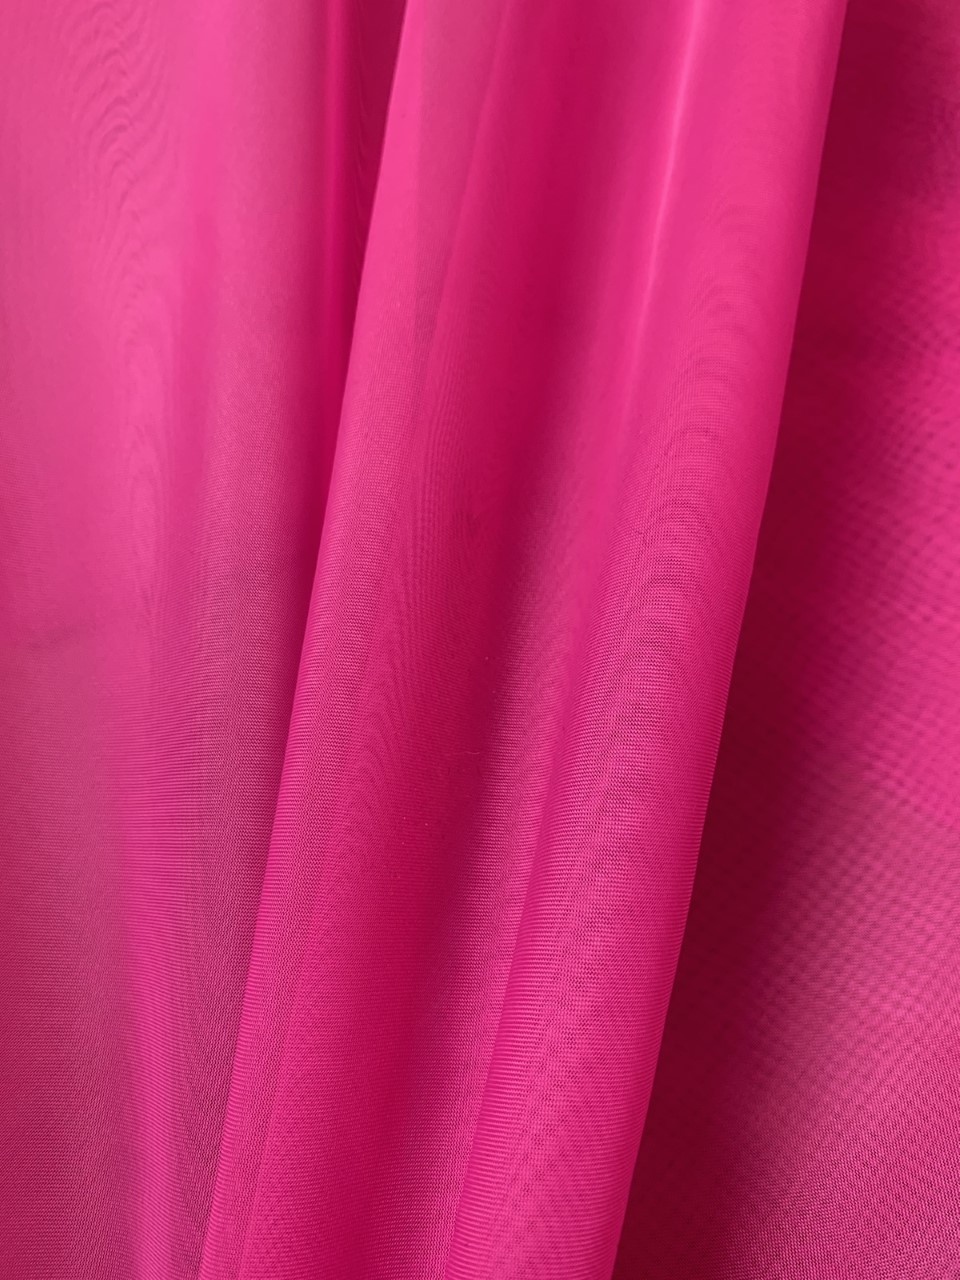 118" Fuchsia Voile Fabric By The Yard